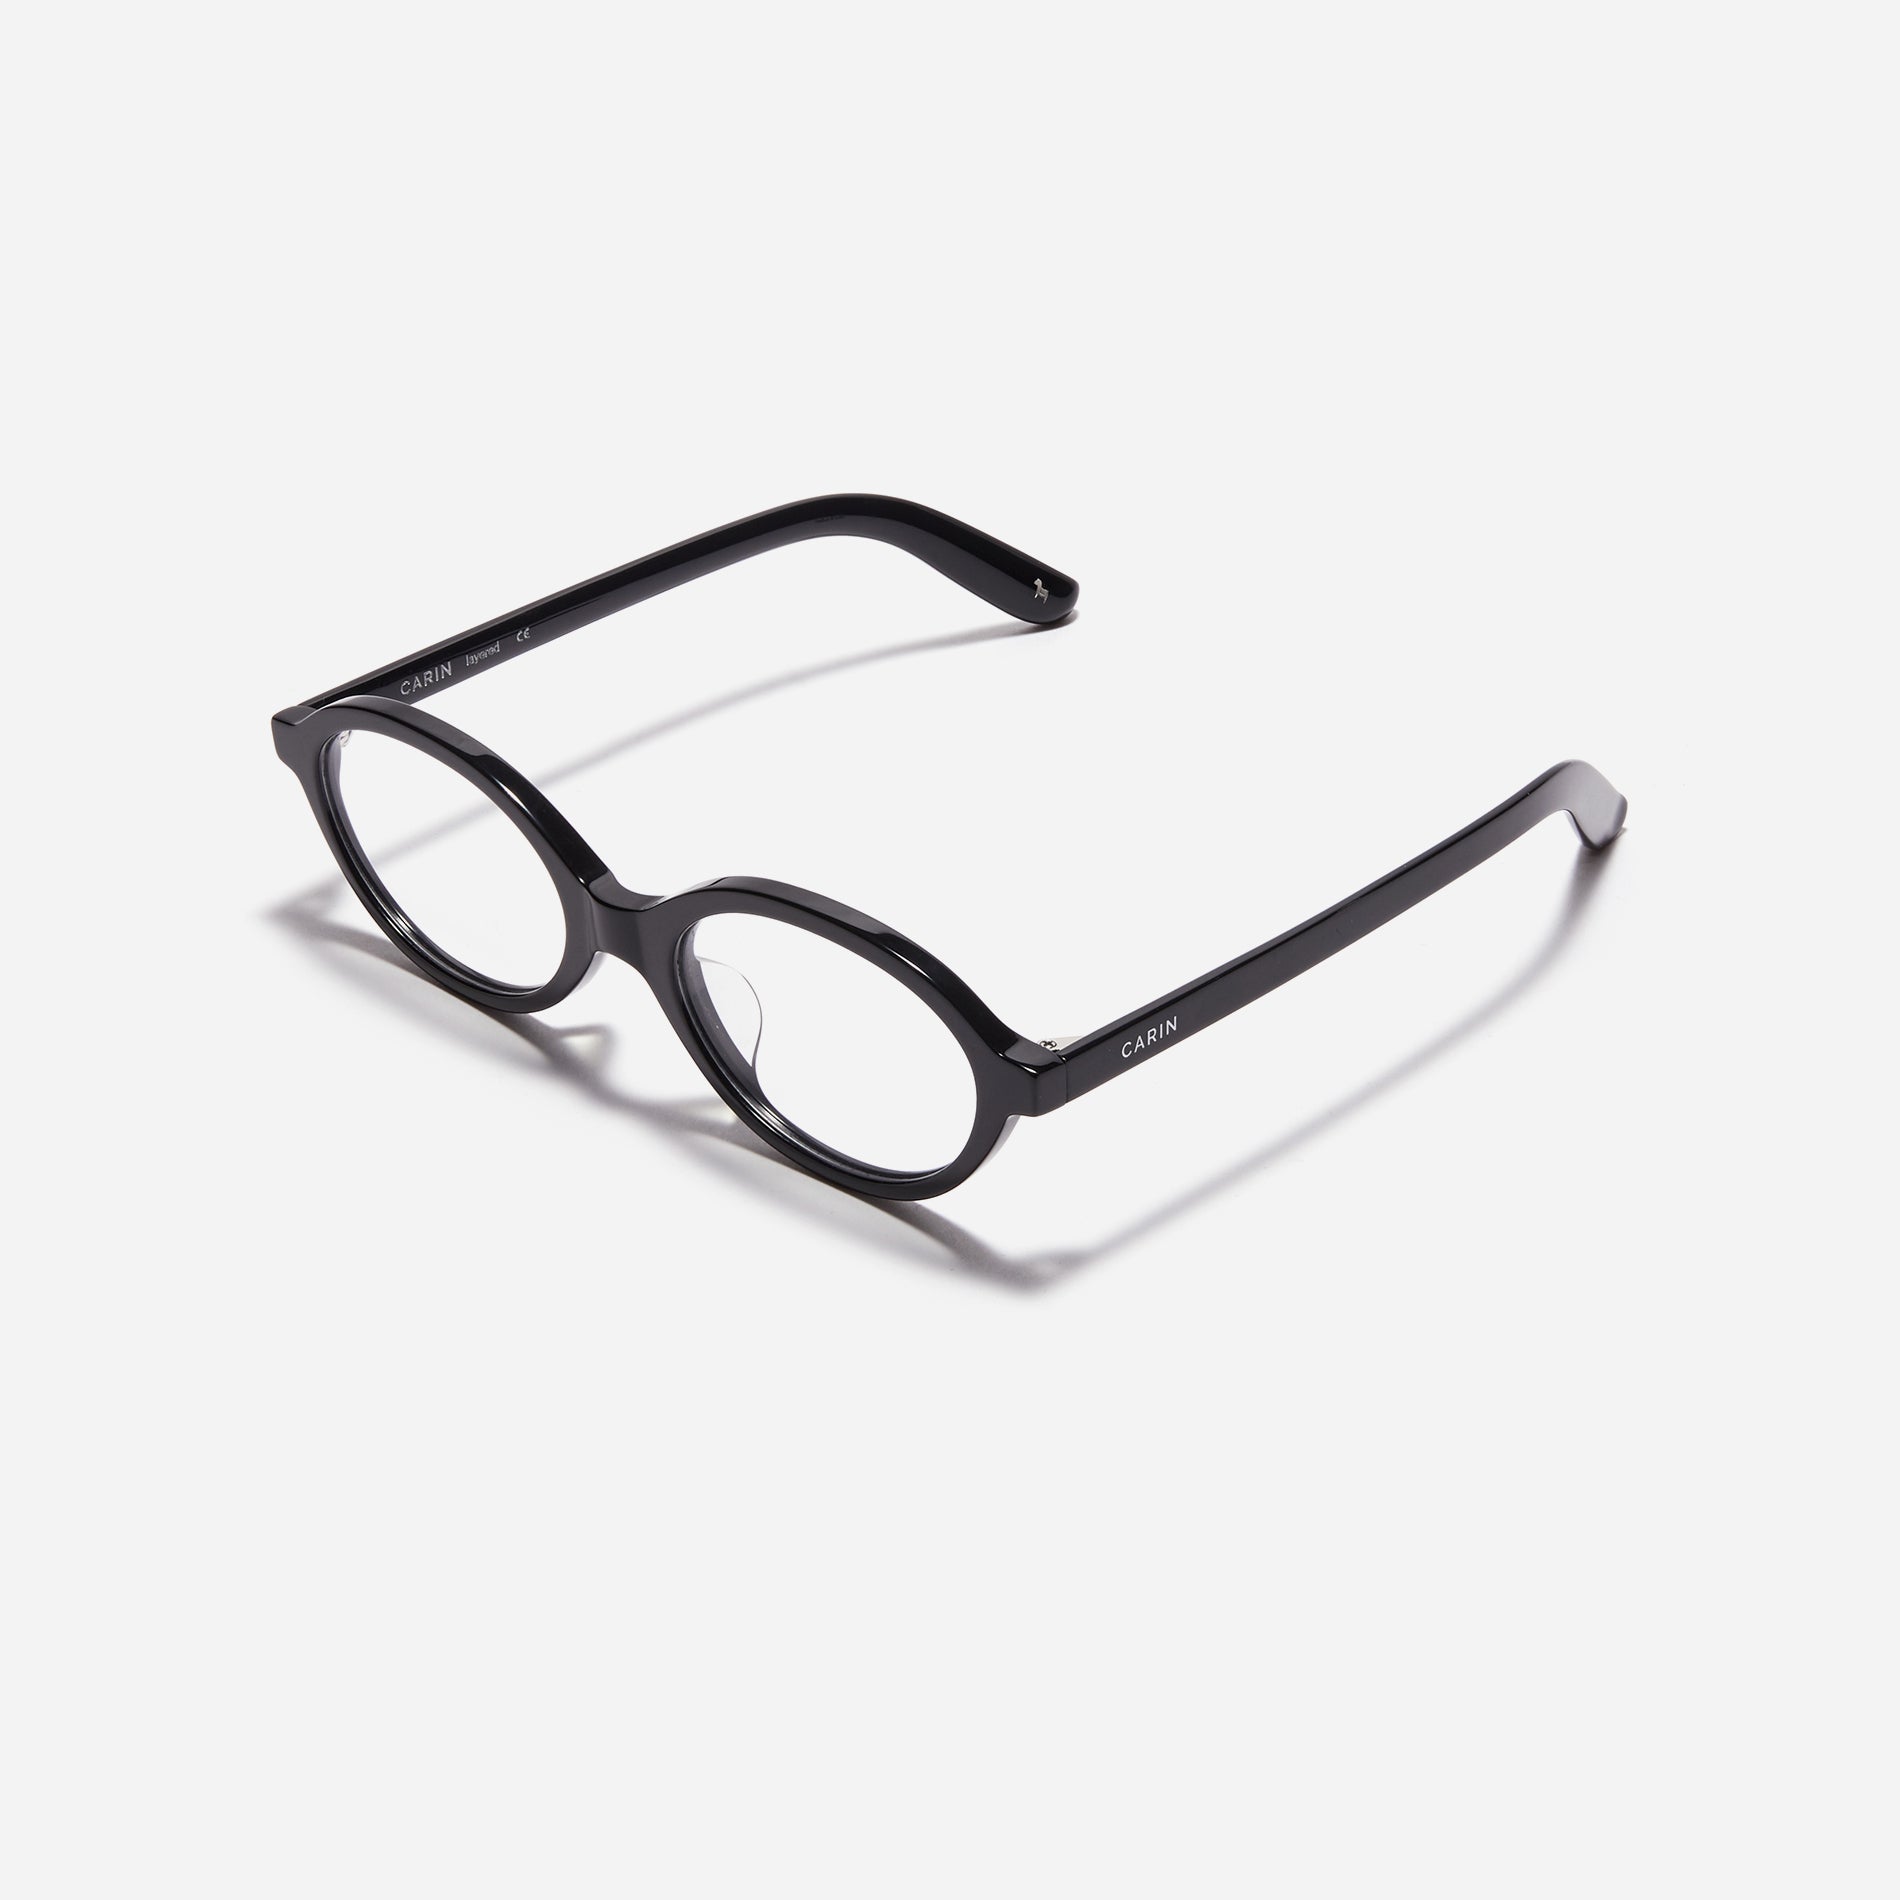 Compact, oval-shaped horn-rimmed eyeglasses featuring a narrow rim and bold frame. Their design captures a modern reinterpretation of 90s retro vibes, providing a trendy and stylish look.